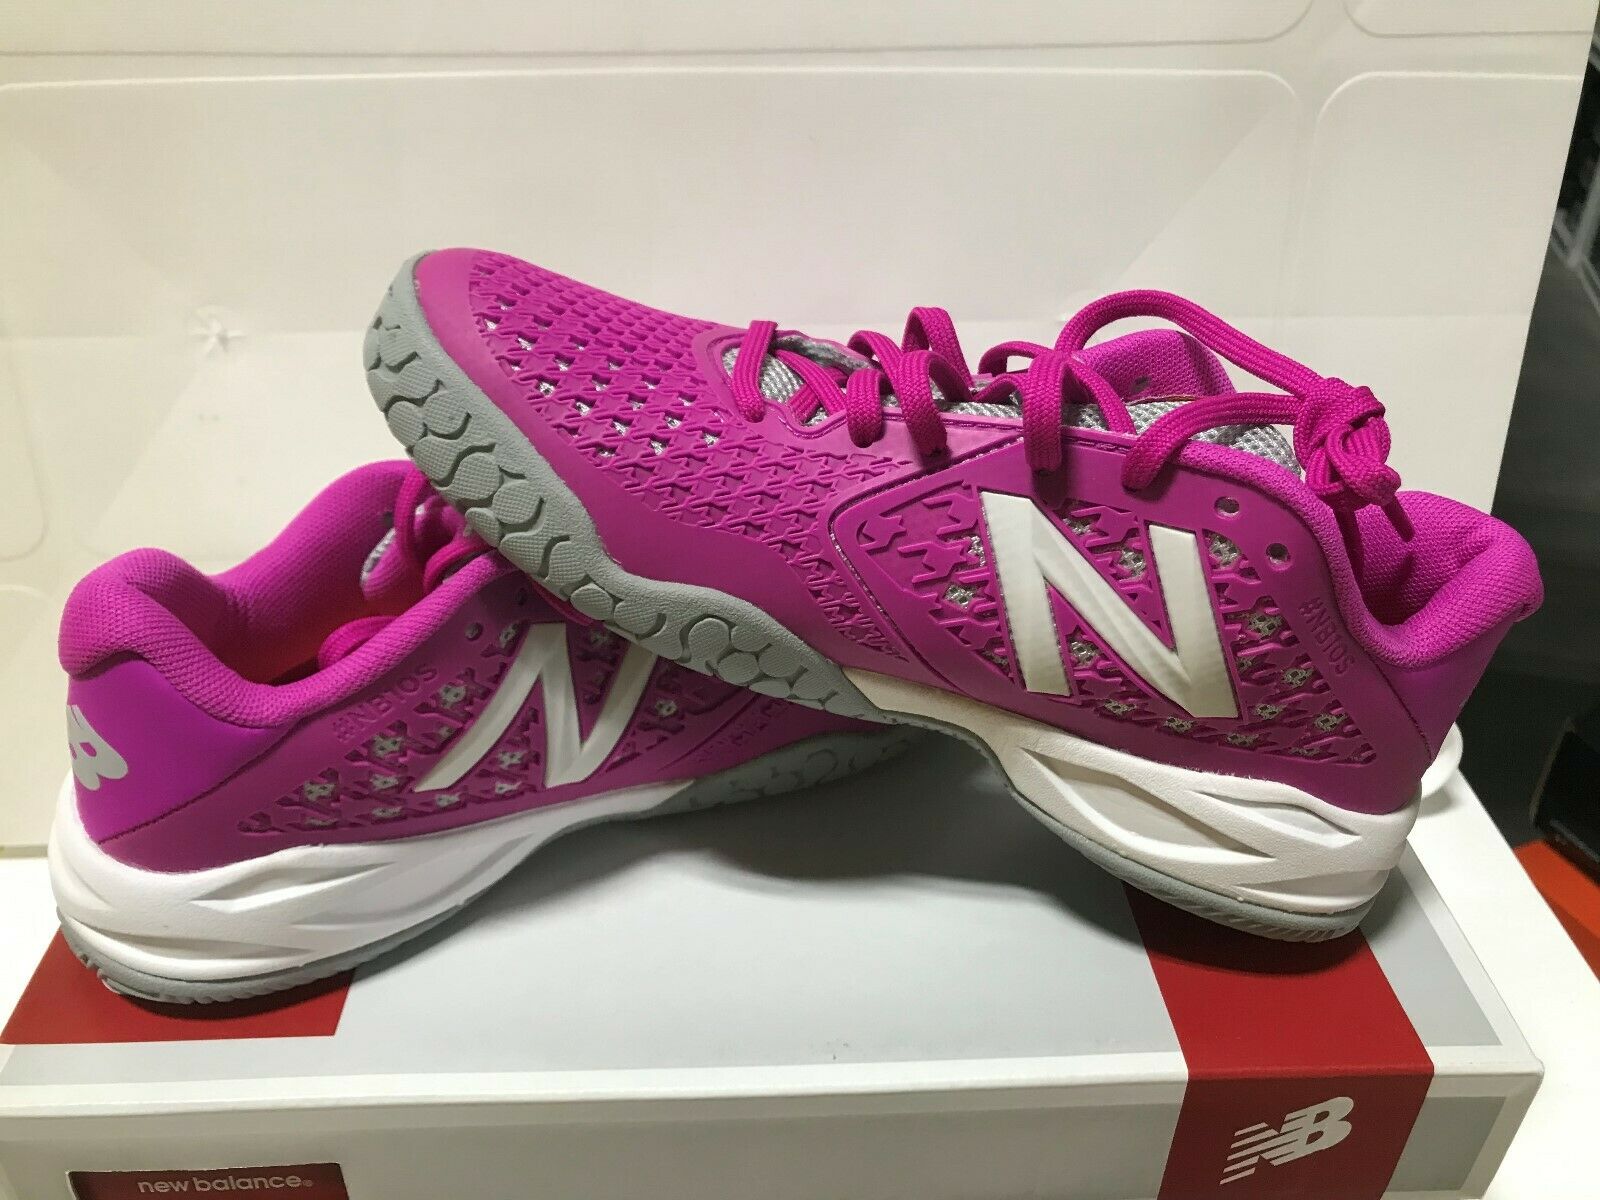 New Balance Girls Tennis Shoes Style #kc996piy